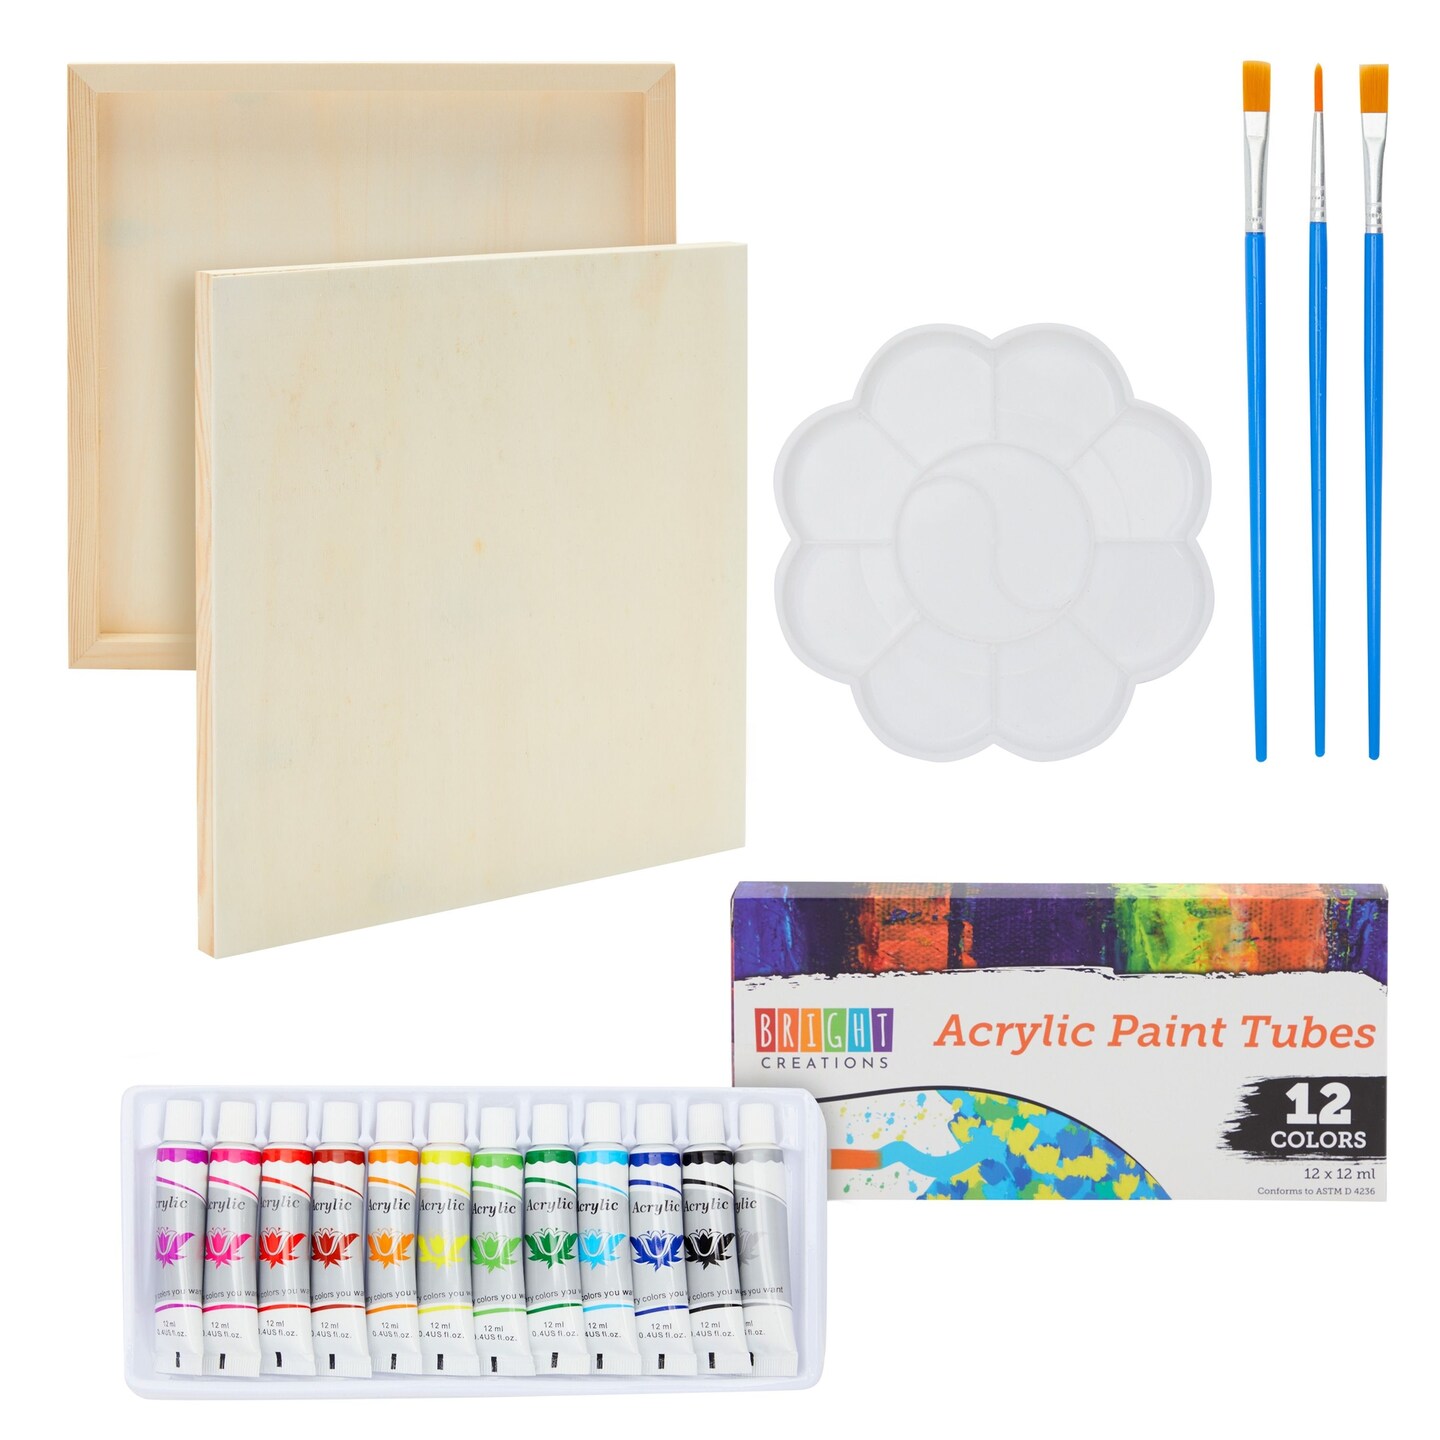 Lartique Canvases for Painting – 43 Piece Painting Canvas, Painting Supplies,  Paint Kit – Painting Kit Includes Canvas Boards for Painting - Works with  Acrylic, Oil, Pastel and Watercolor Paint